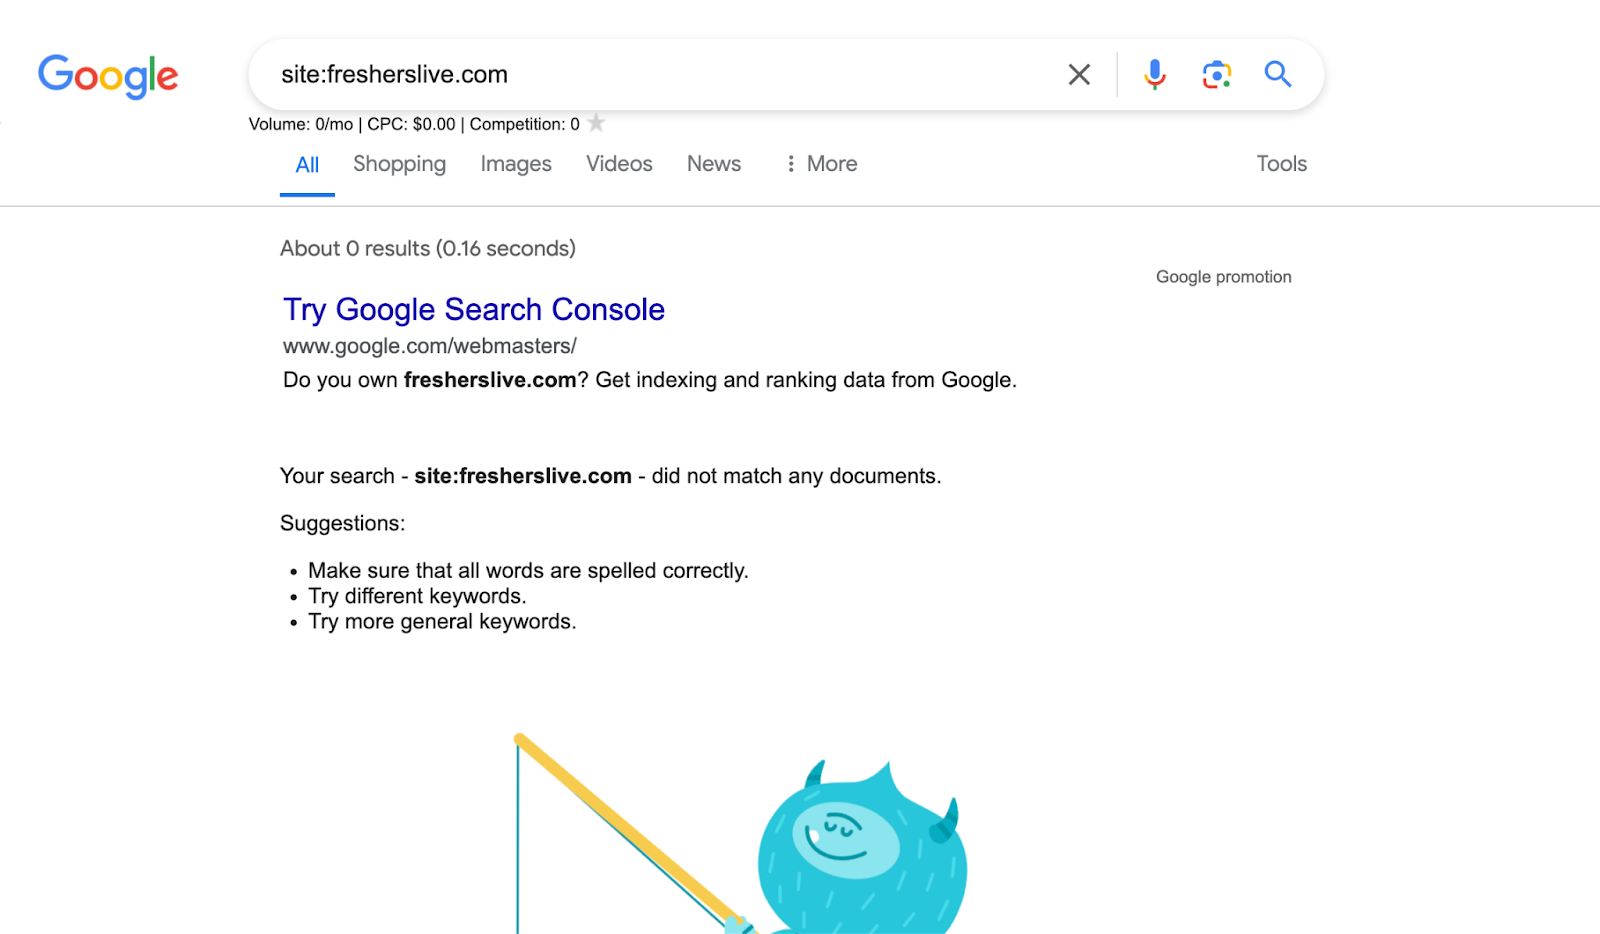 Fresherslive.com is completely deindexed from Google